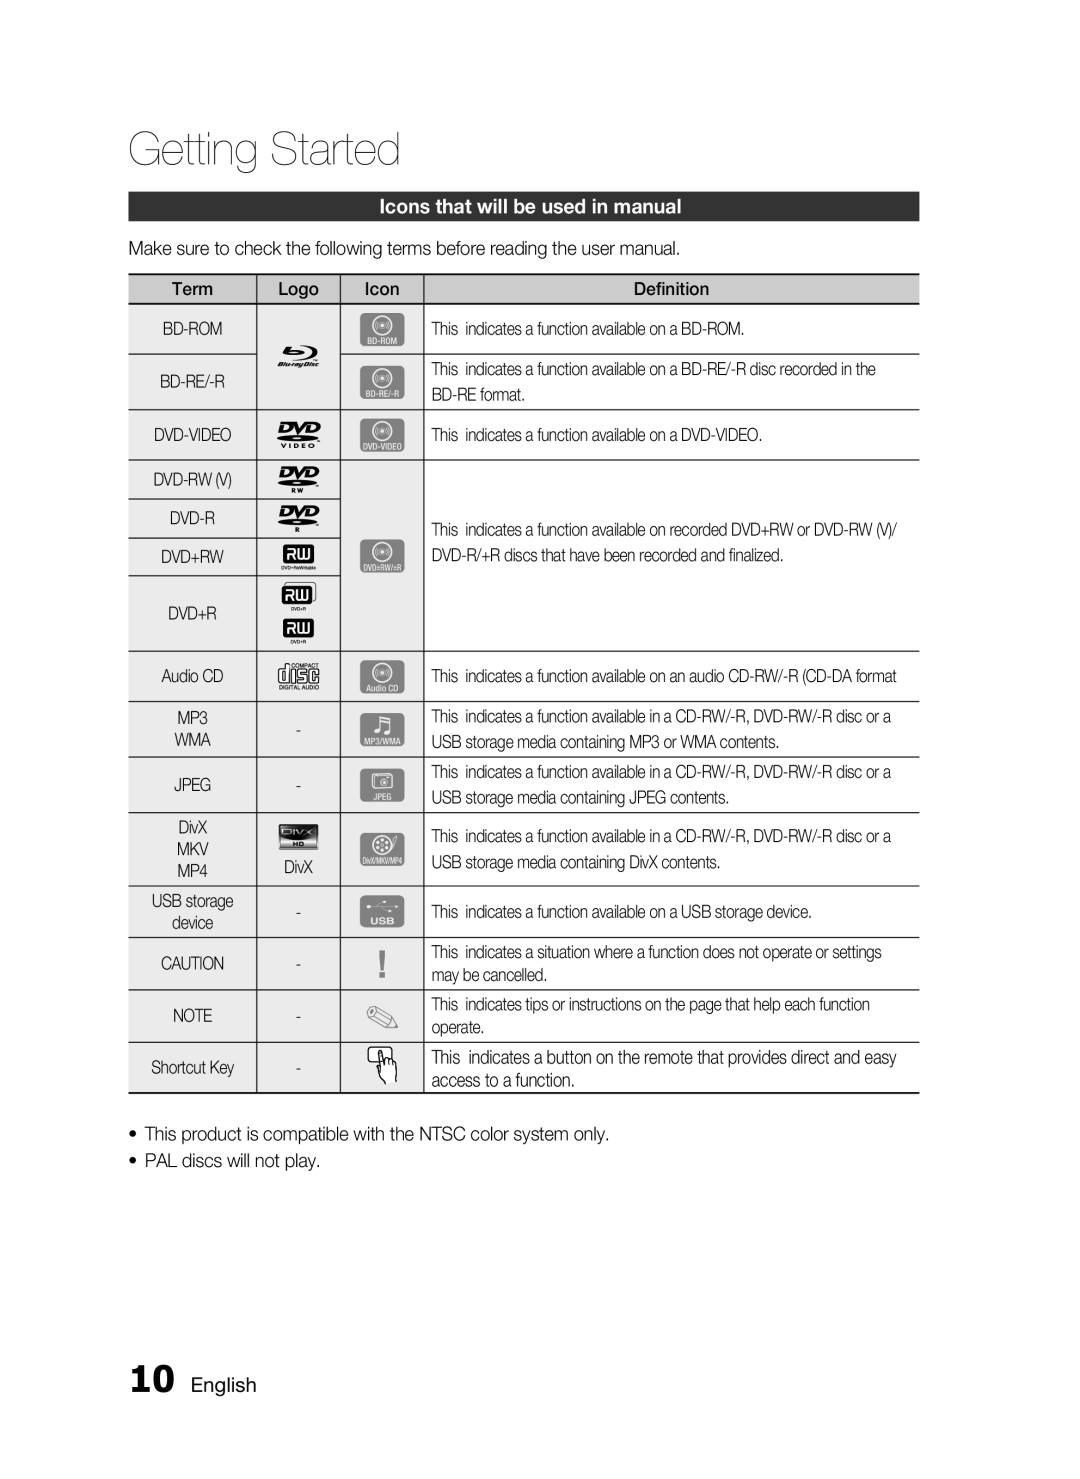 Samsung C6600 user manual Icons that will be used in manual, English, Getting Started 